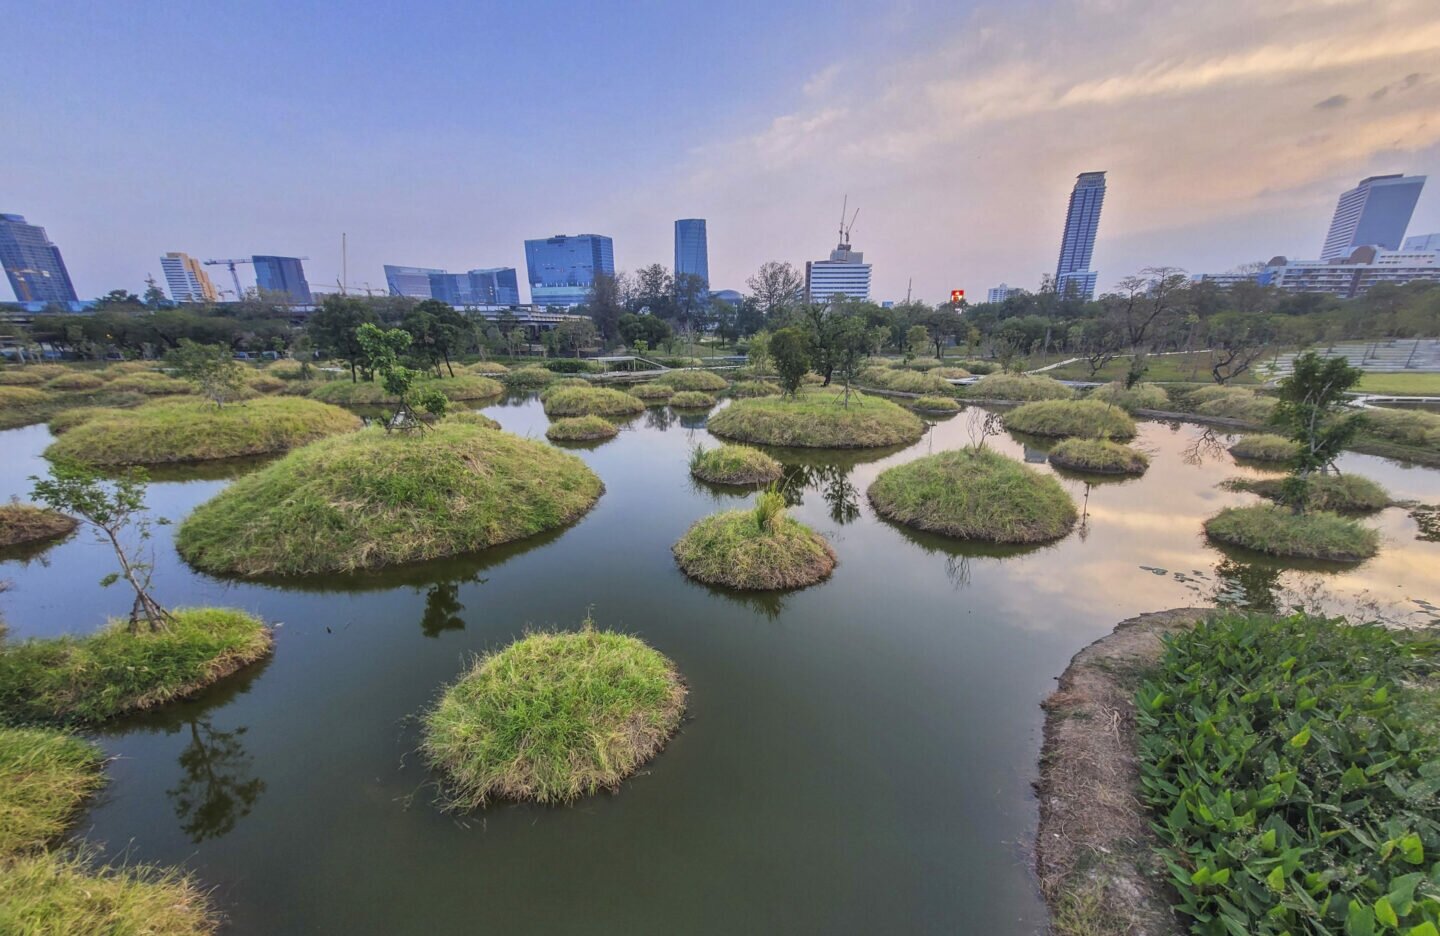 Concrete To Green: Behind Bangkok’s Amazing Pandemic Makeover